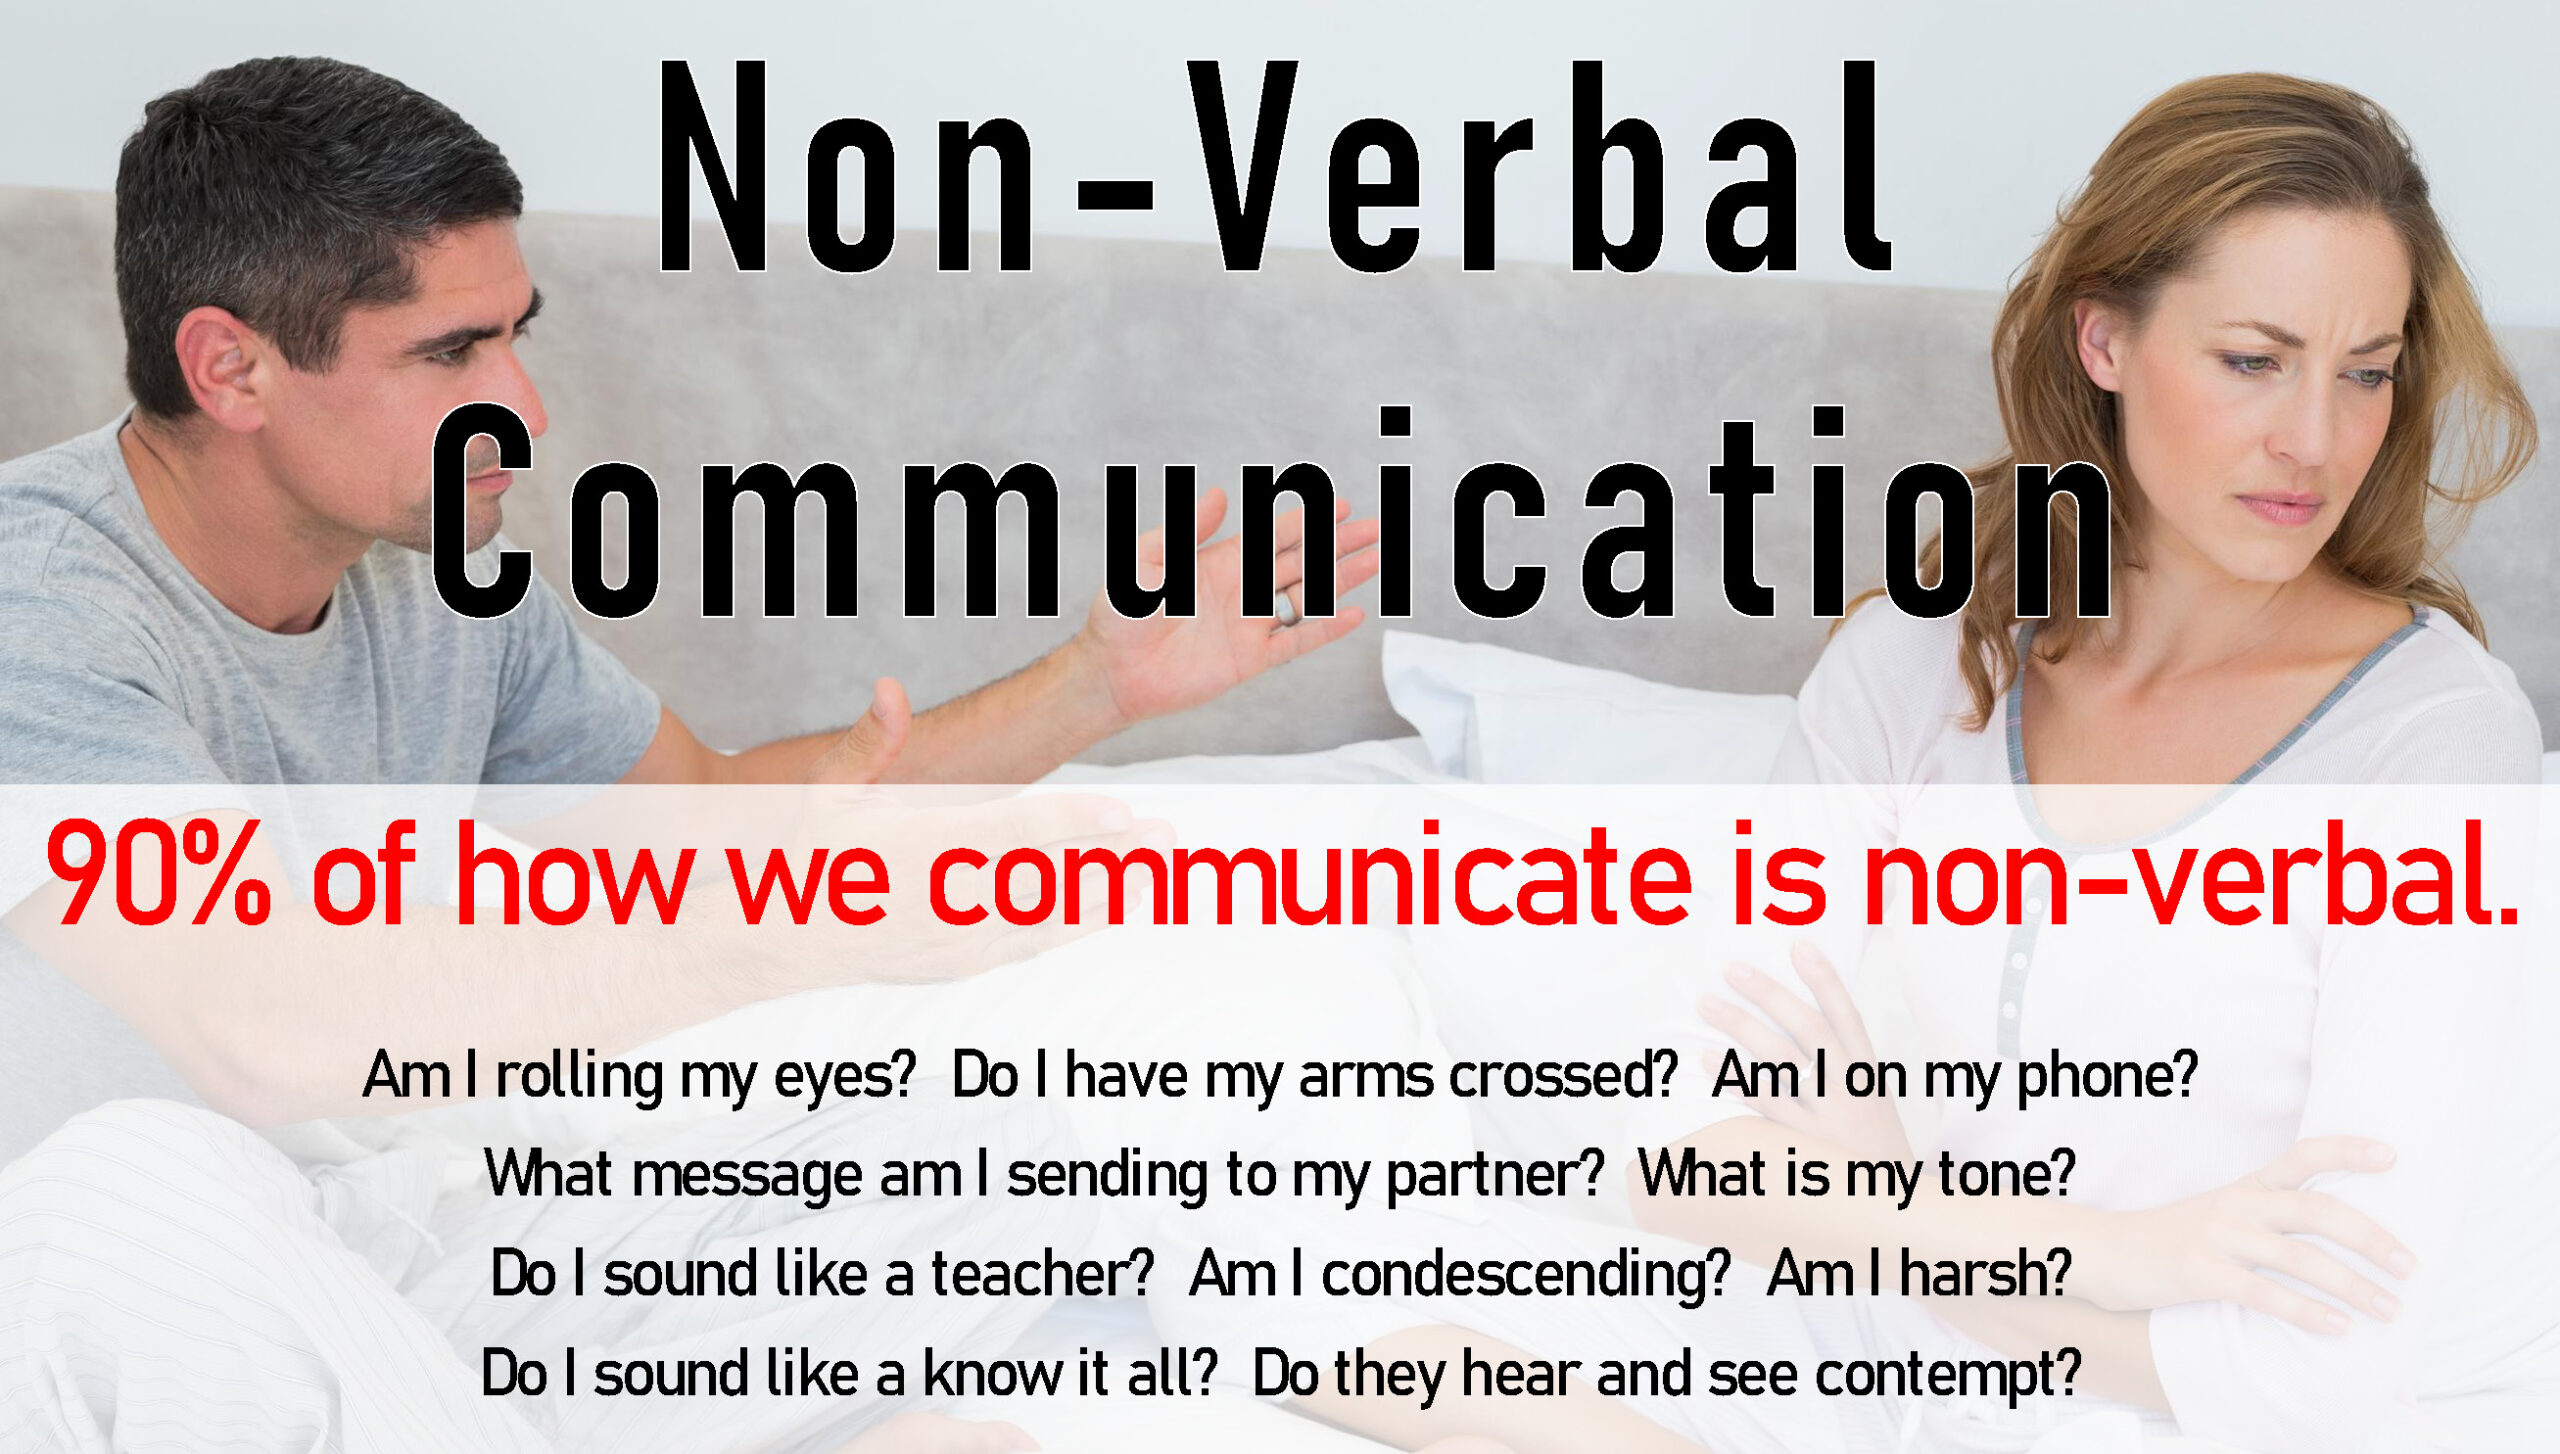 Non-Verbal Communication in Relationships